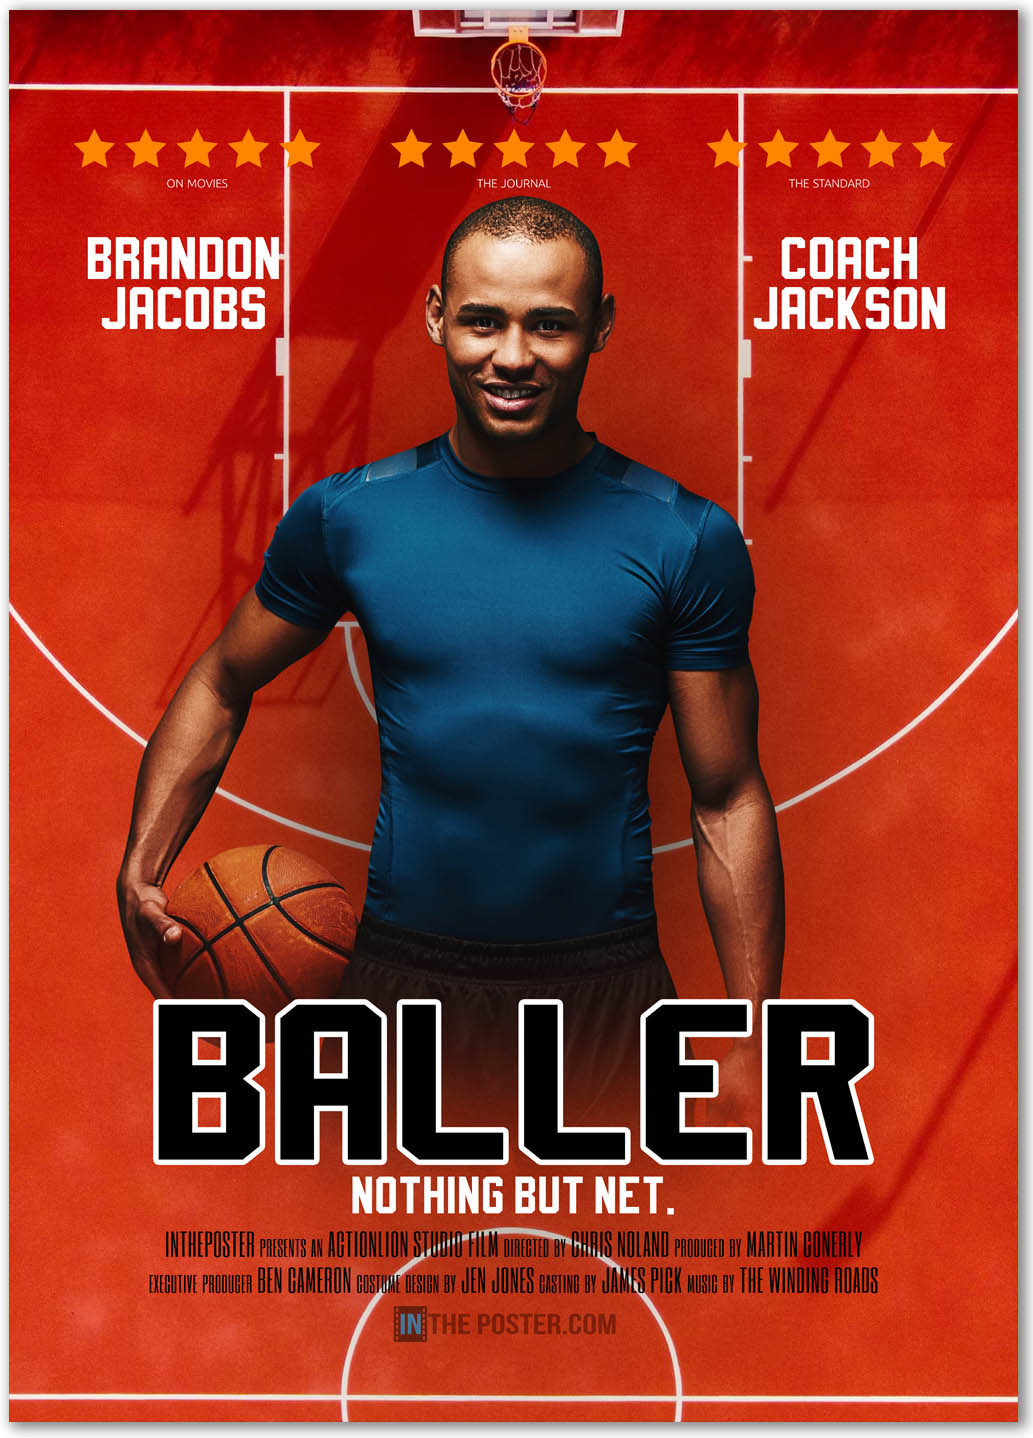 Basketball Movie Poster with smiling man holding basketball in blue shirt